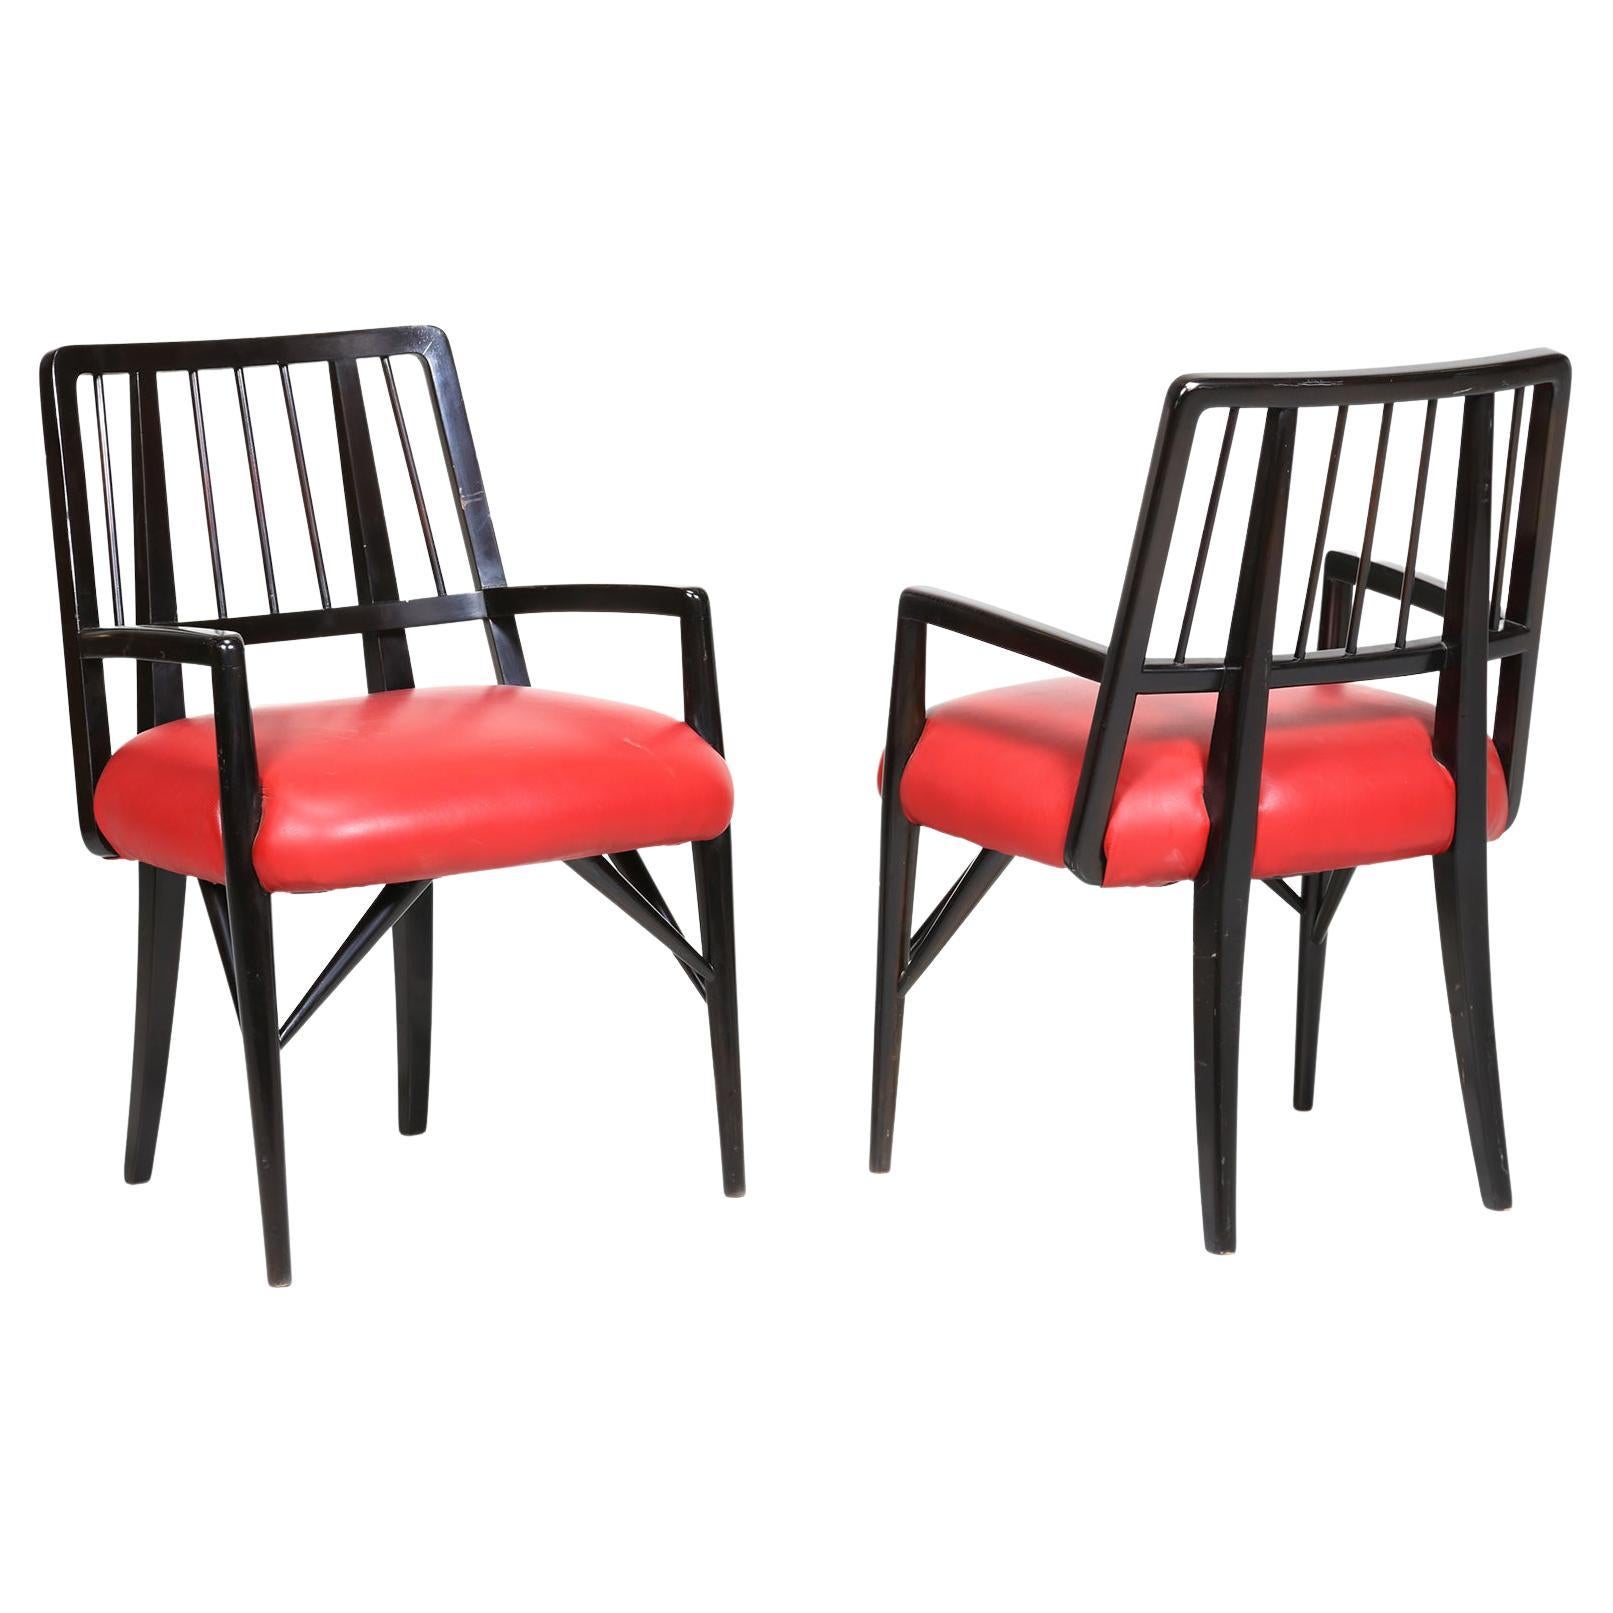 Paul Laszlo Set of Four Chairs in Black Lacquered Wood, 1950s For Sale